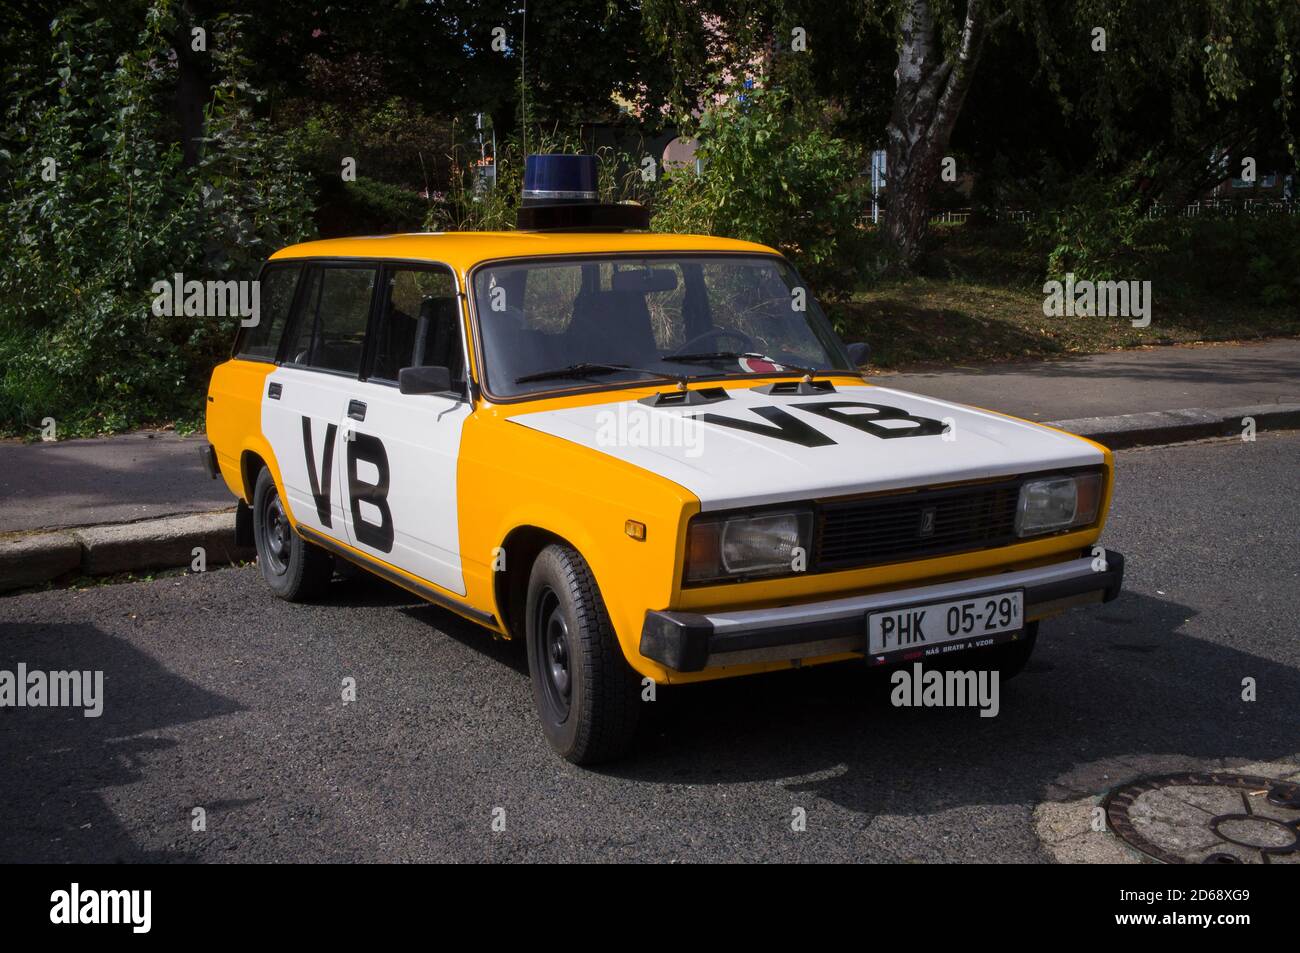 The Lada VAZ 2107 combi veteran car, VB, Public Security, a branch of the National Security Corps, parked in front of the Restaurant and hotel Beranek Stock Photo